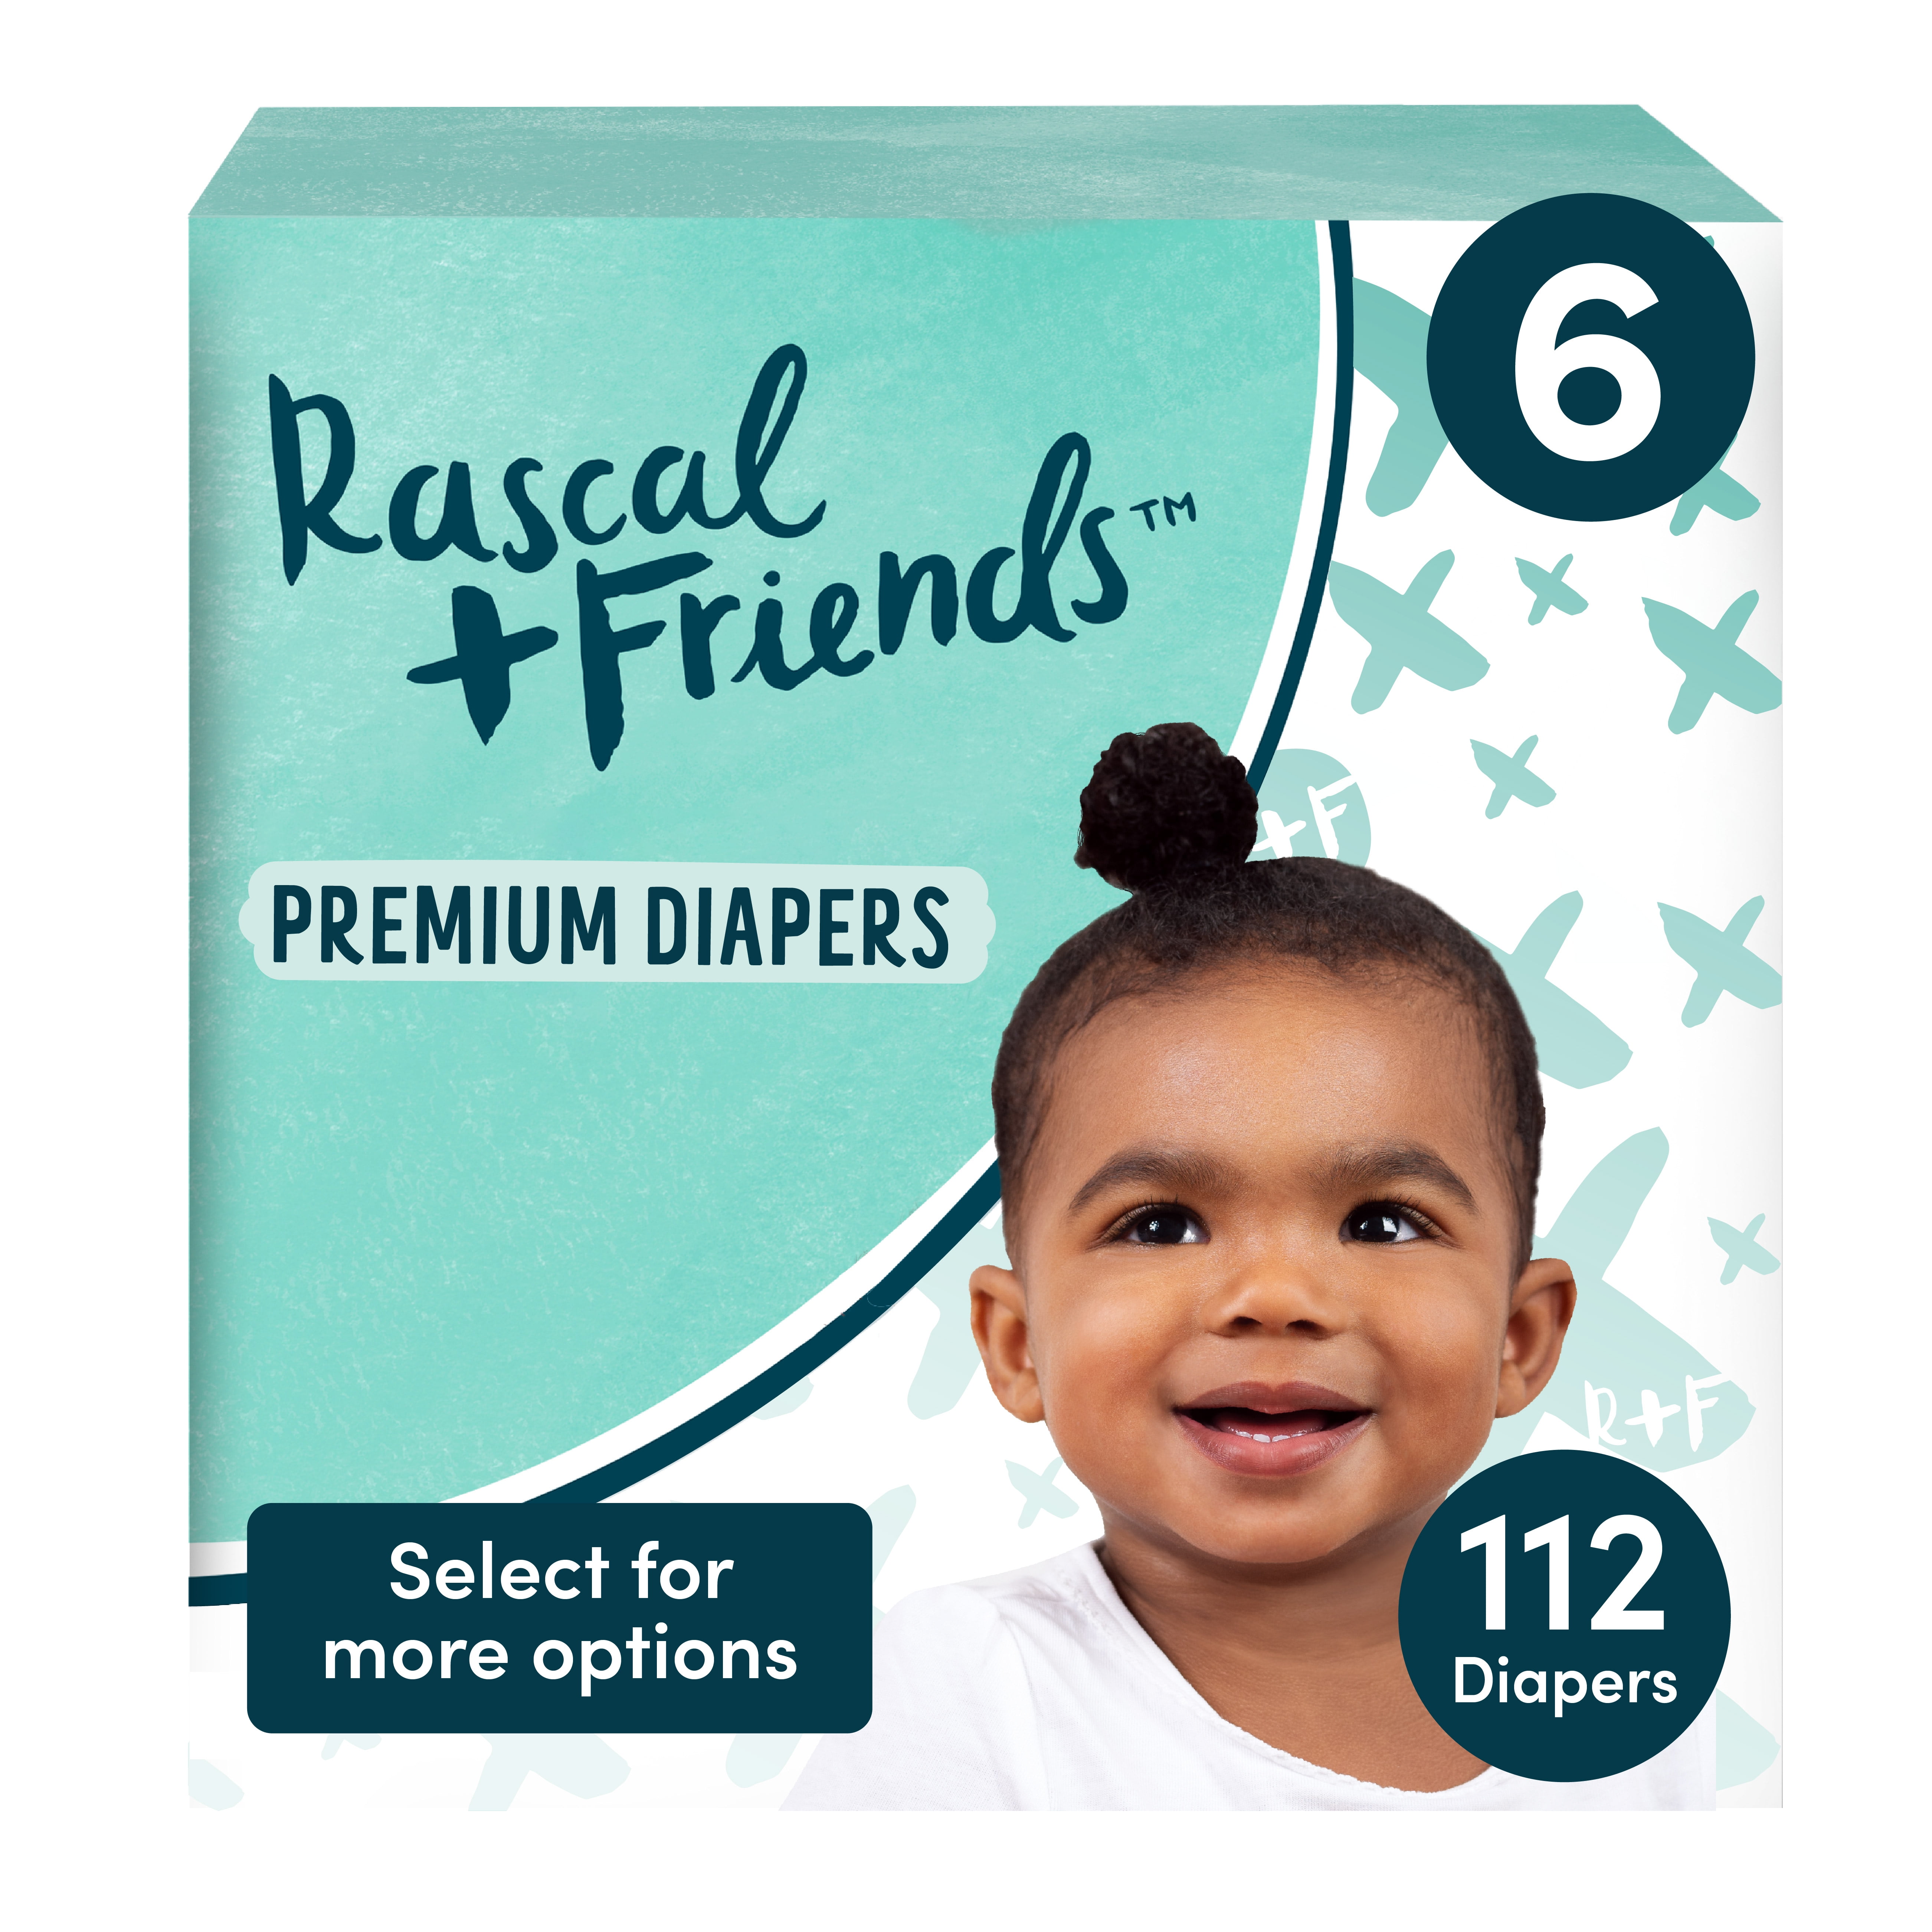 Rascal + Friends Premium Diapers Size 6, 112 Count (Select for